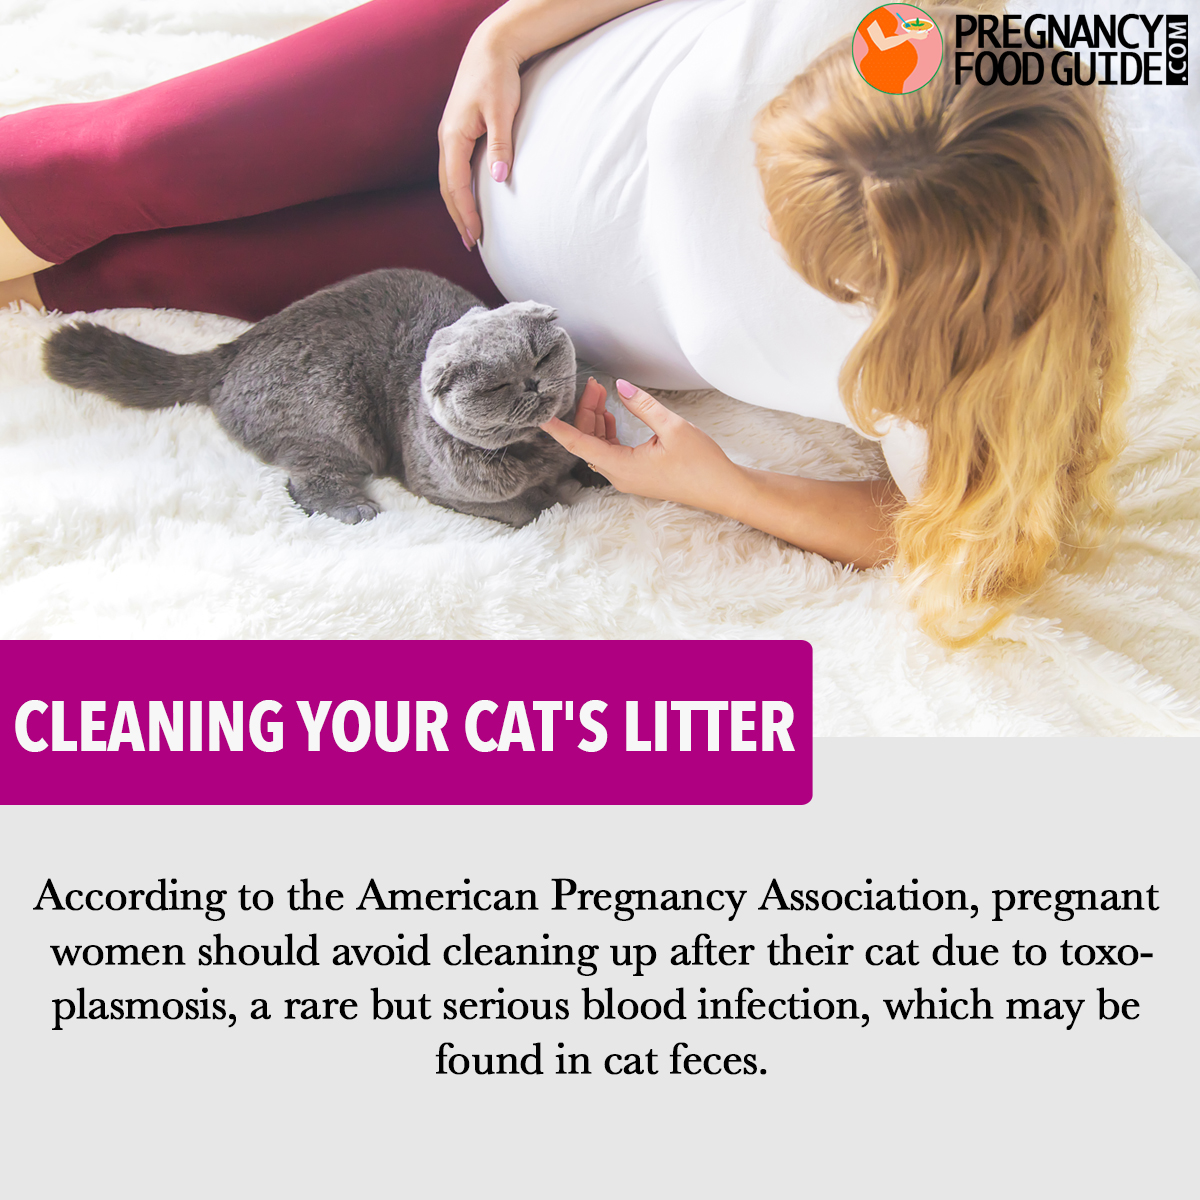 Cleaning your cat's litter